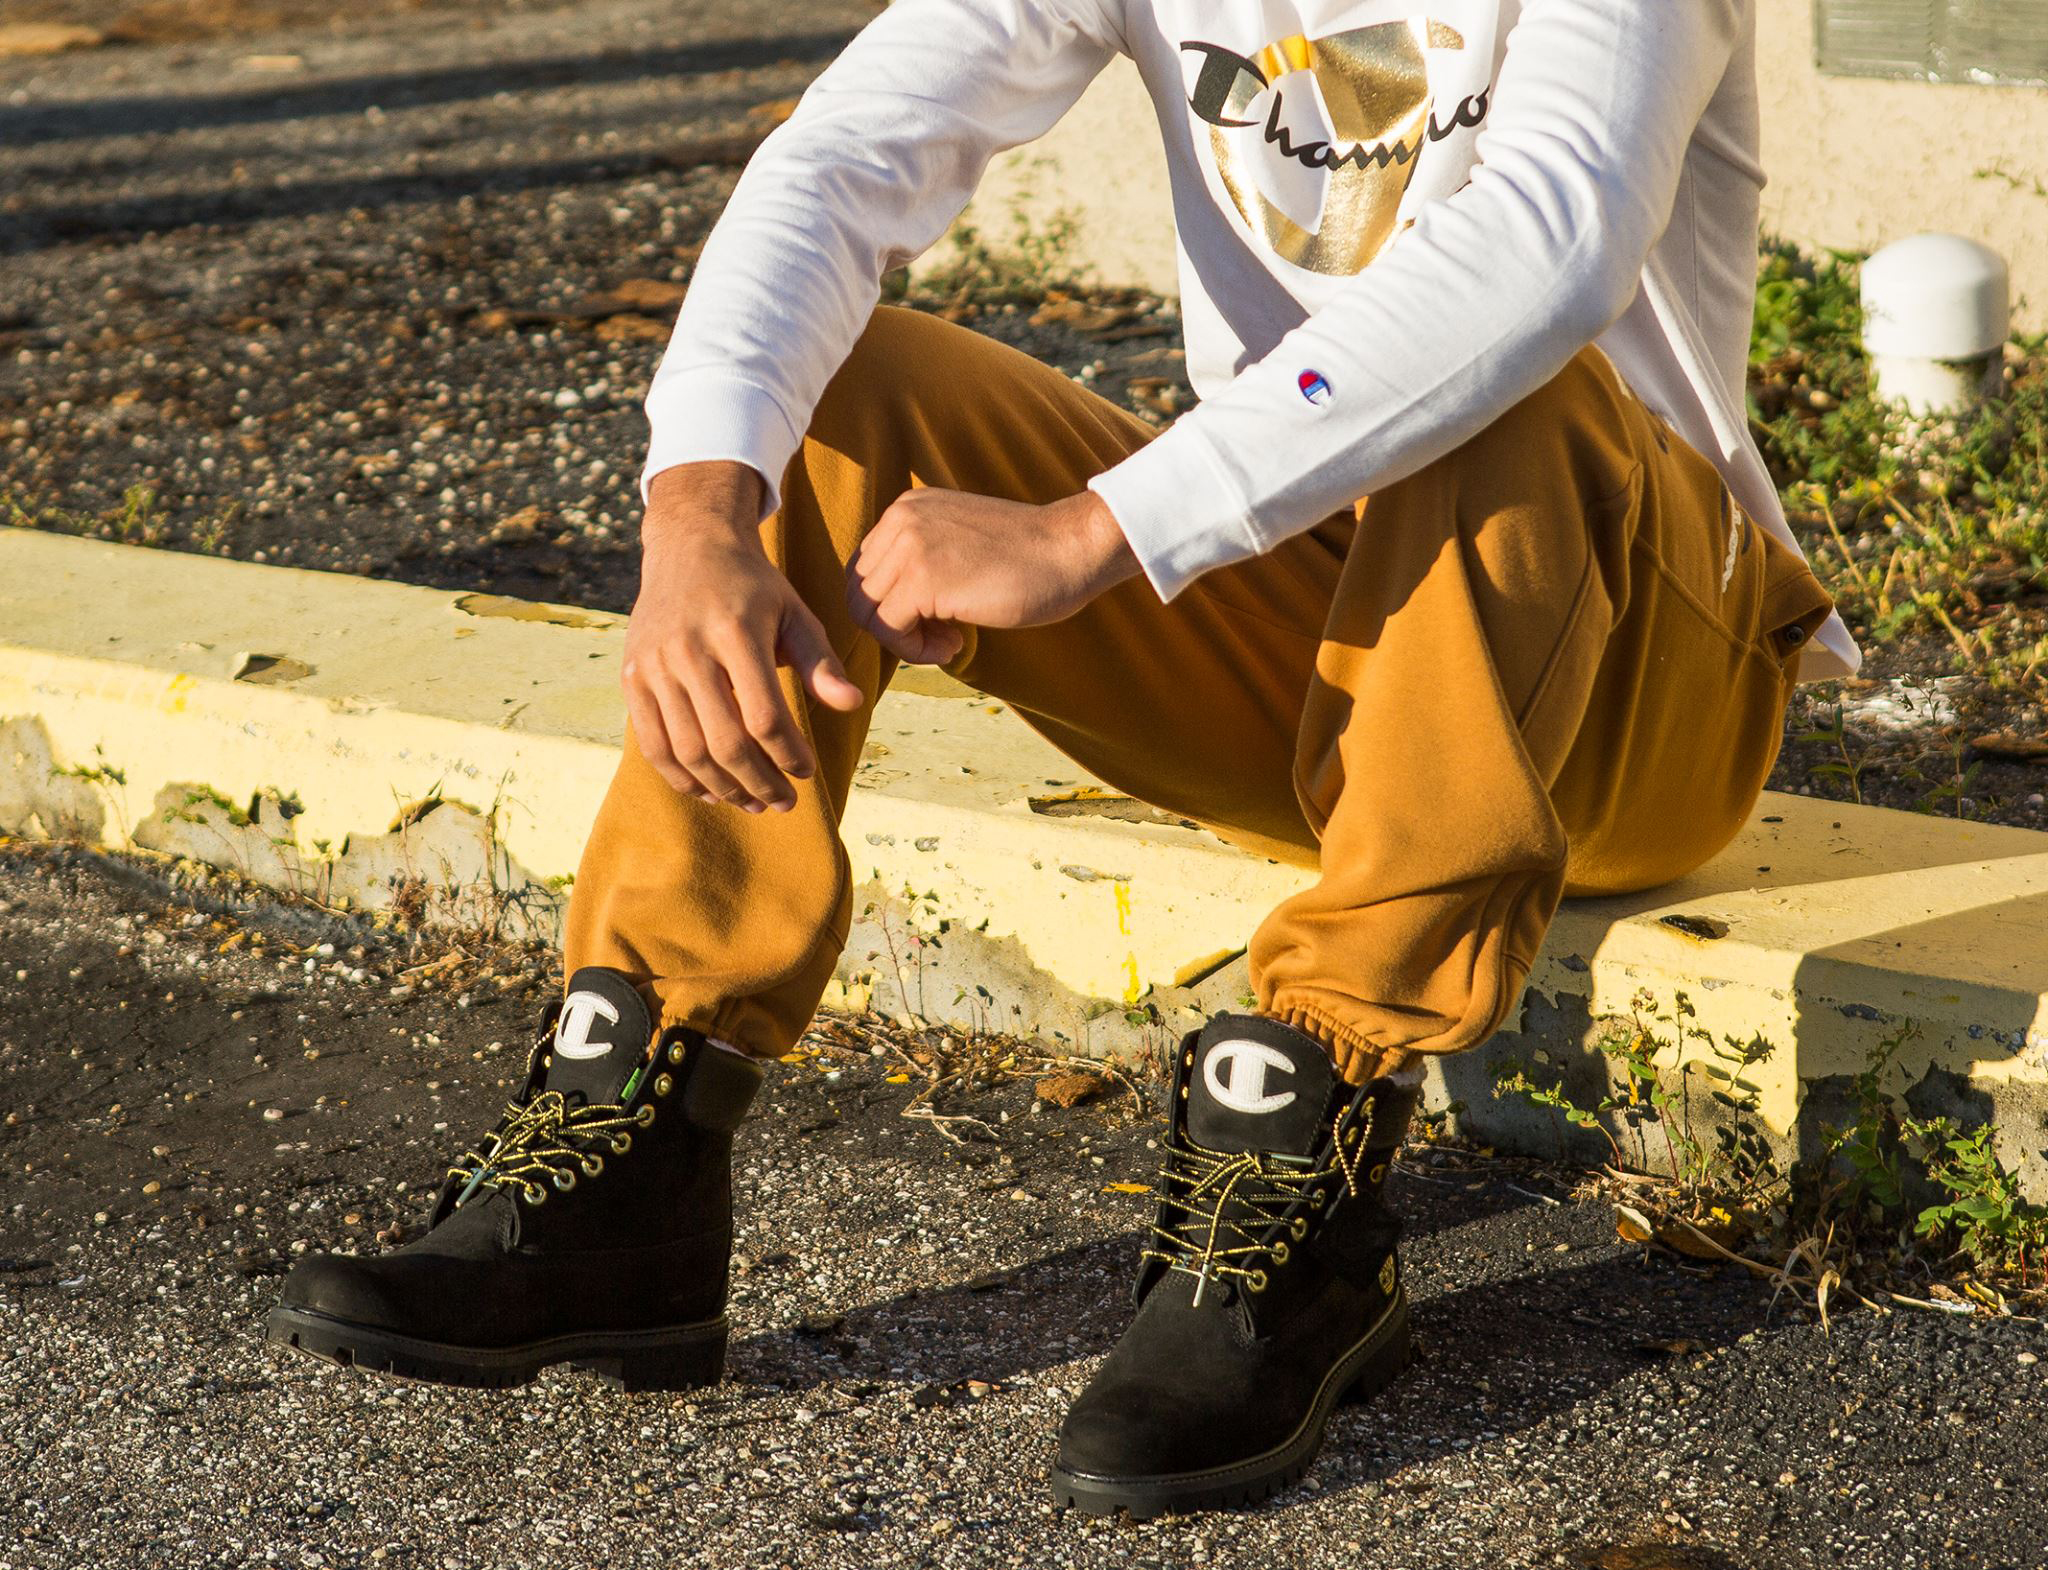 Champion x Timberland Boots and Clothing | SneakerFits.com